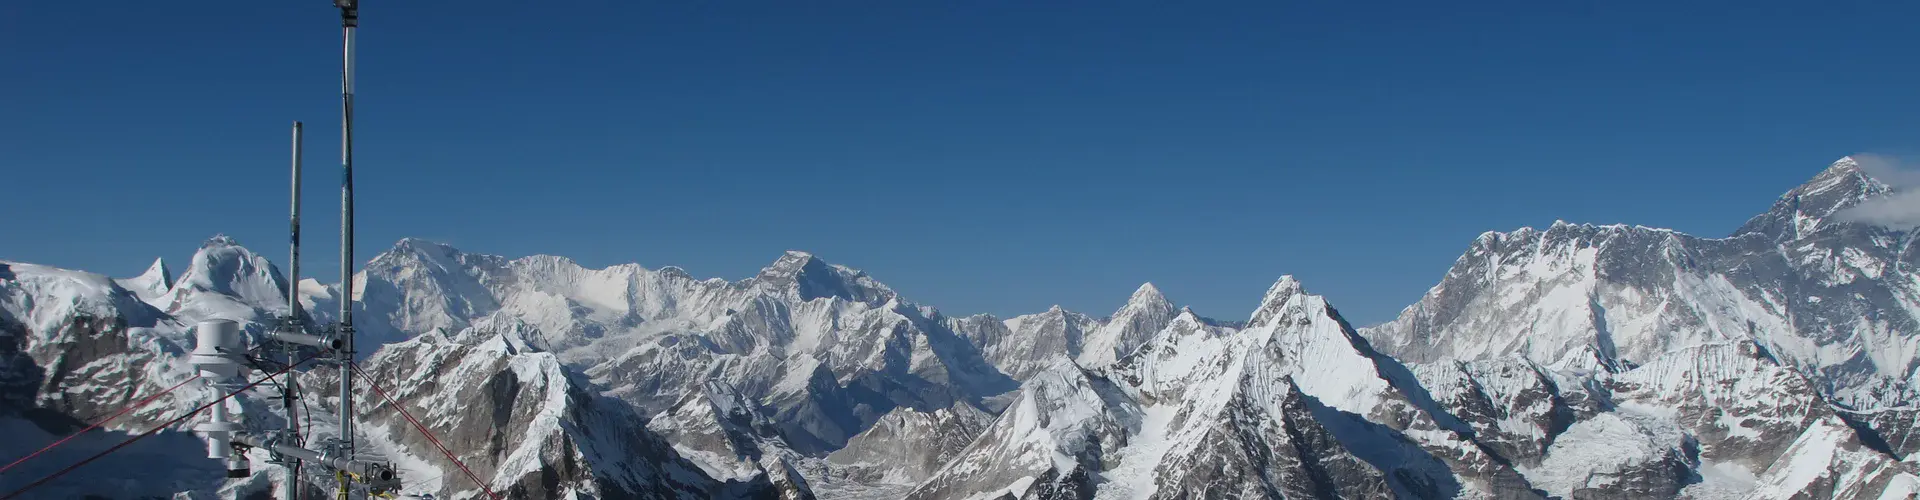 Instruments used on Mera Glacier to study the Dudh Koshi basin (Everest visible in the background) (Credit: Patrick Wagnon)